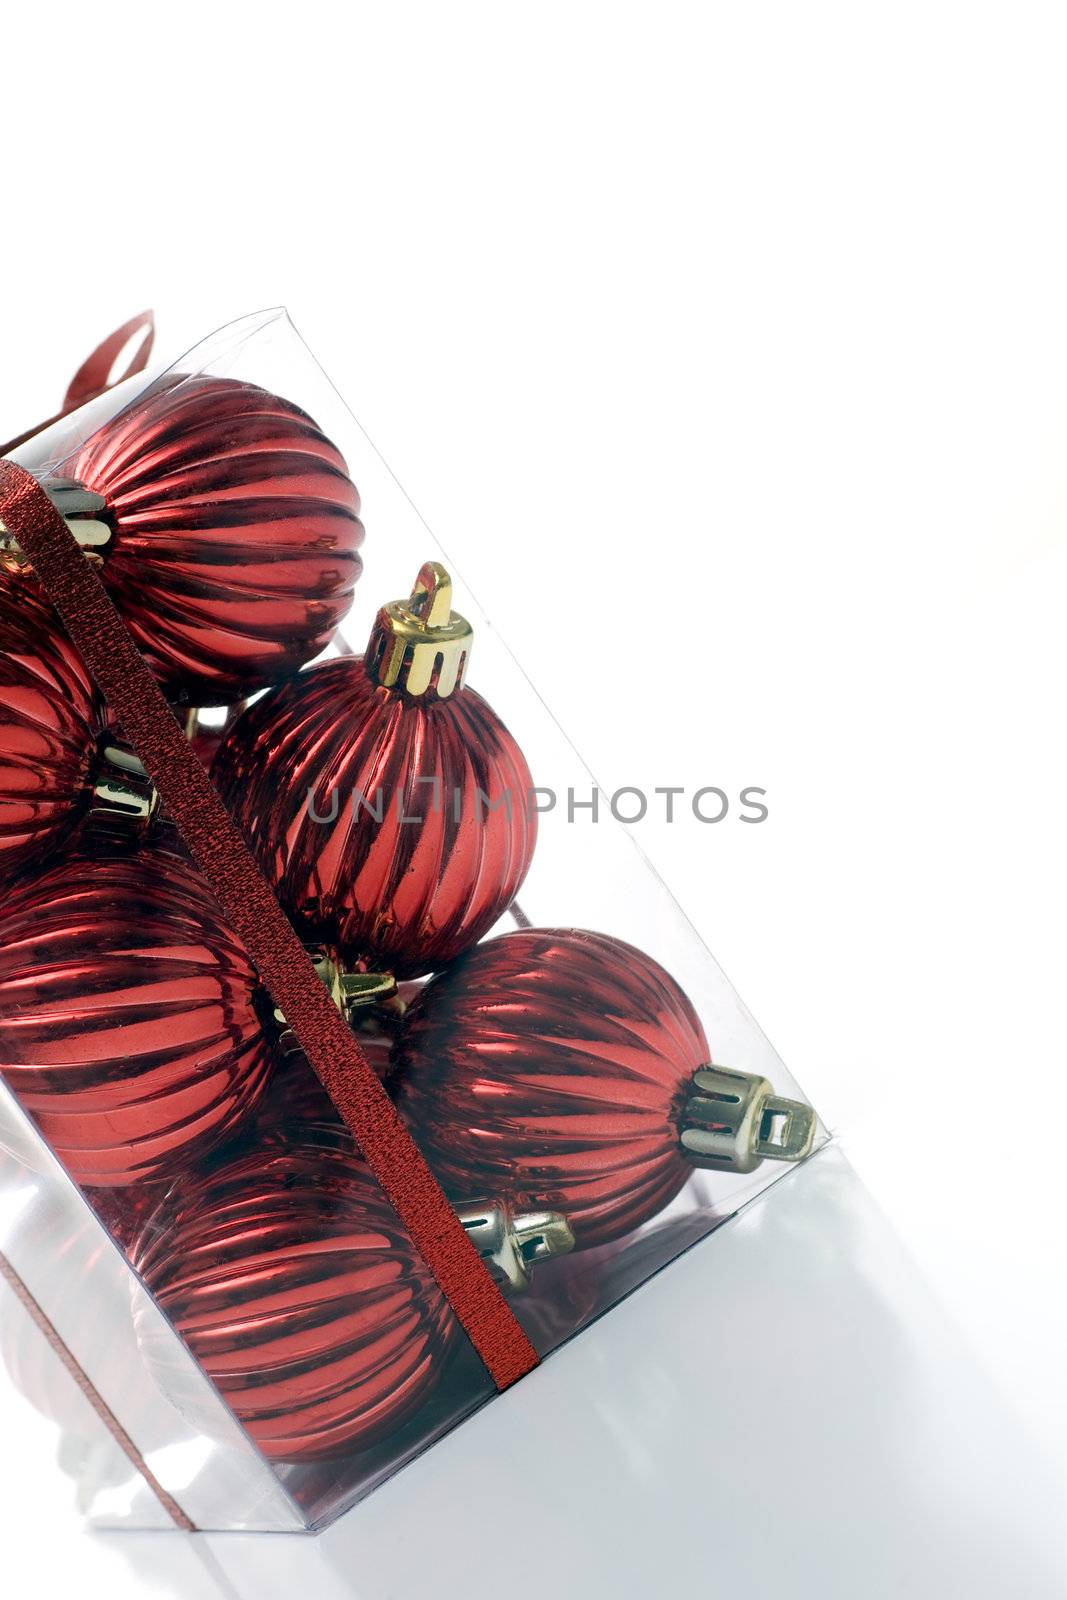 Bunch of red boxed ornaments with ribbon by woodygraphs